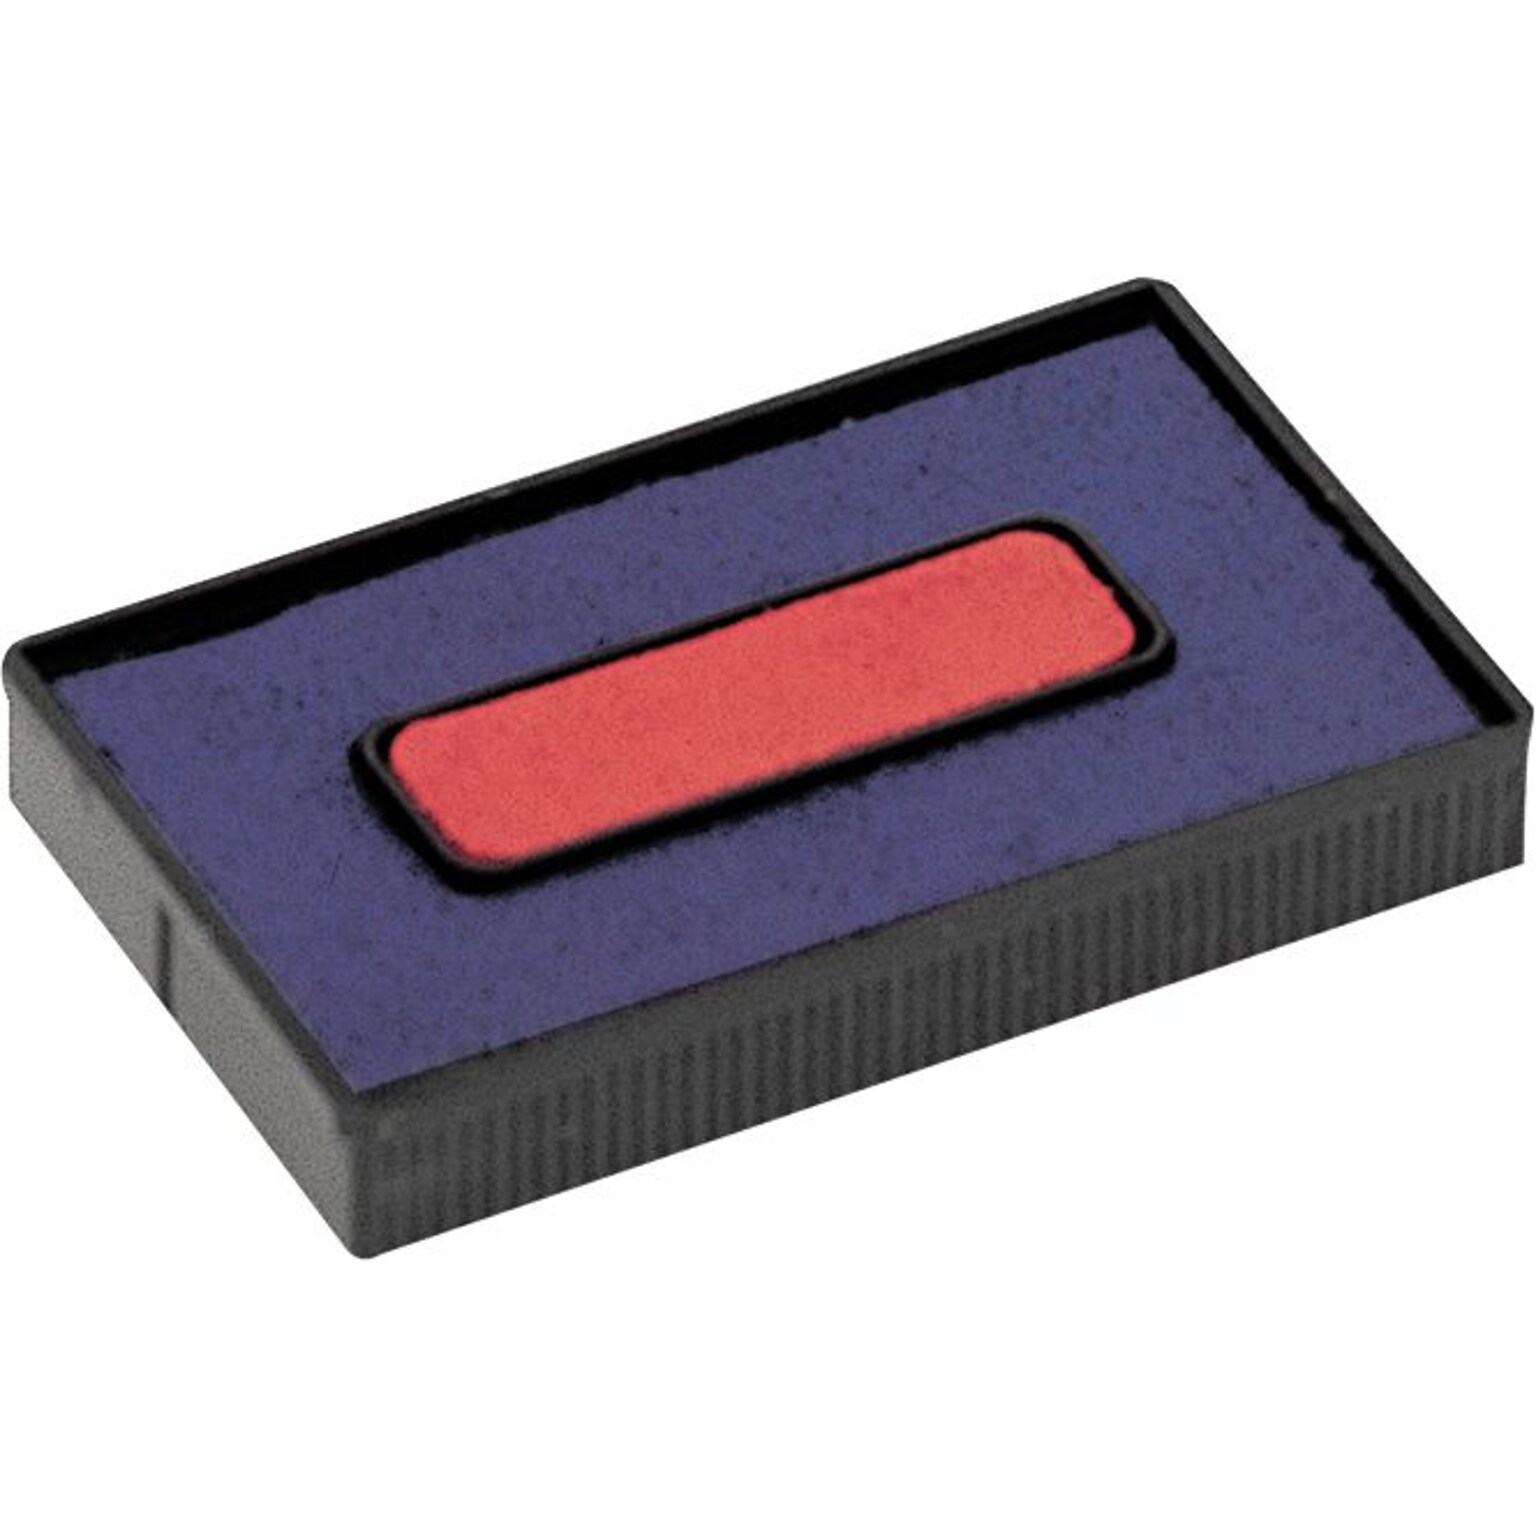 2000 PLUSFelt Replacement Ink Pad for 2000 PLUS Economy Message Dater, Red/Blue (COS061797)